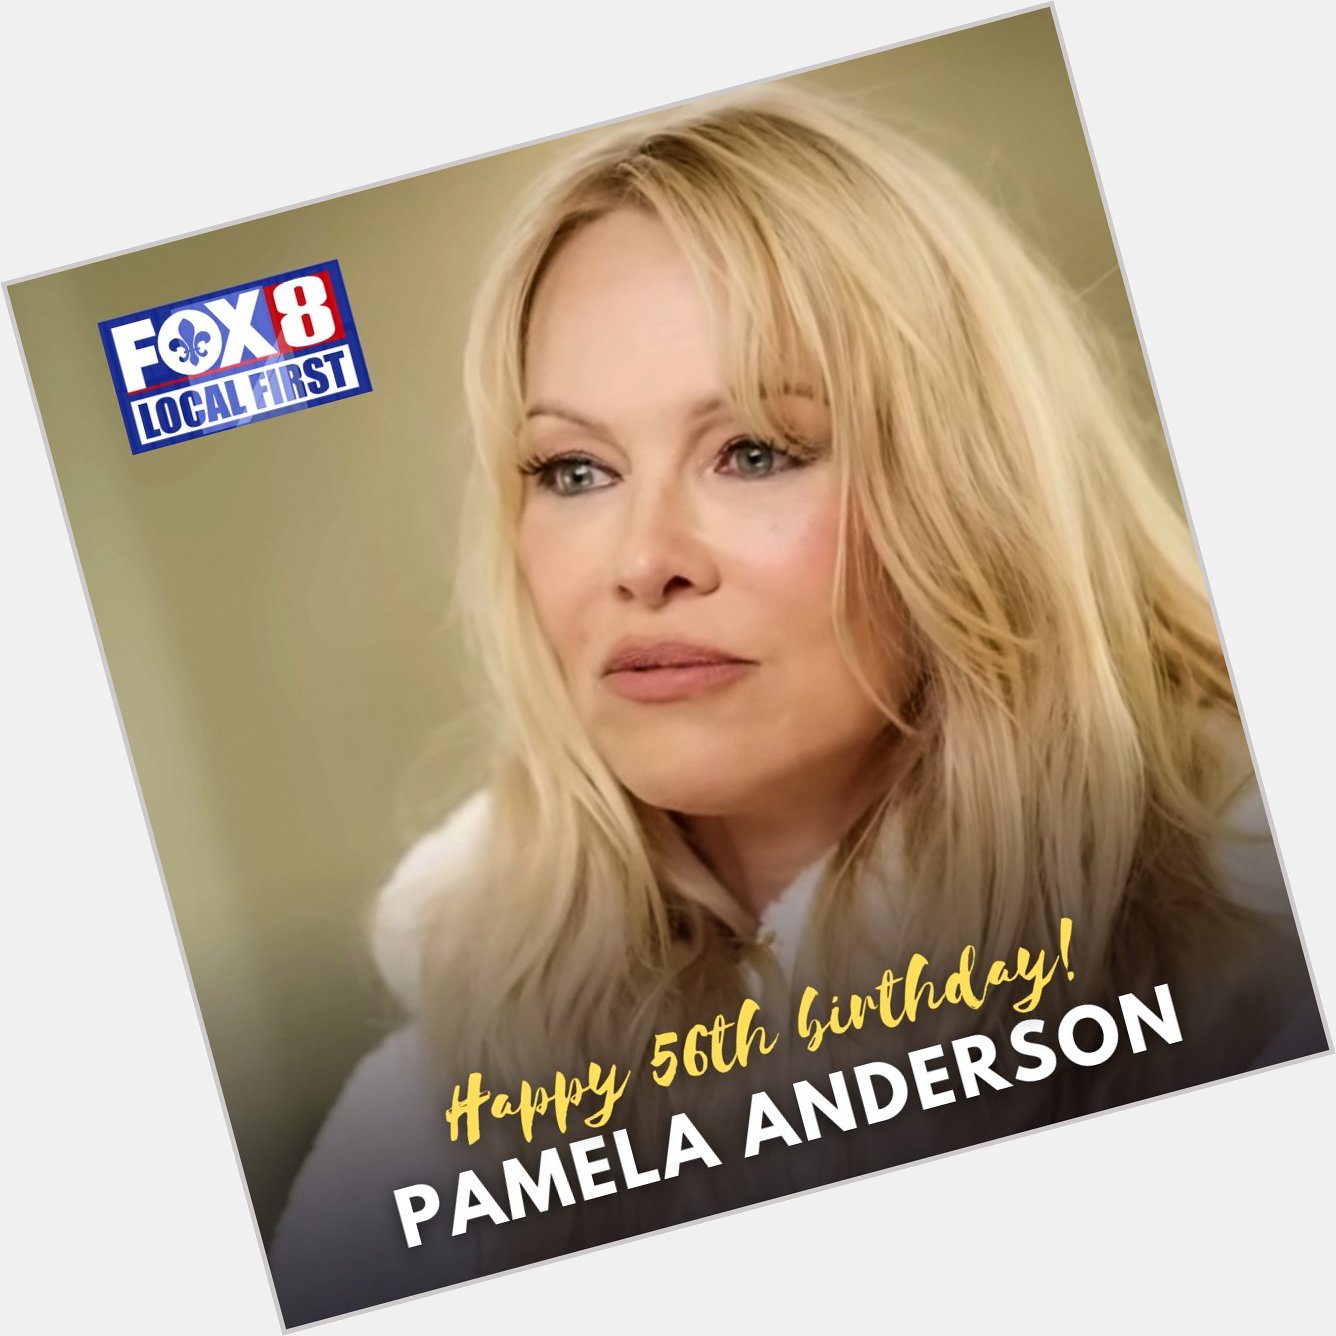 Happy birthday to Pamela Anderson! The former Baywatch star turned 56 on Saturday! 